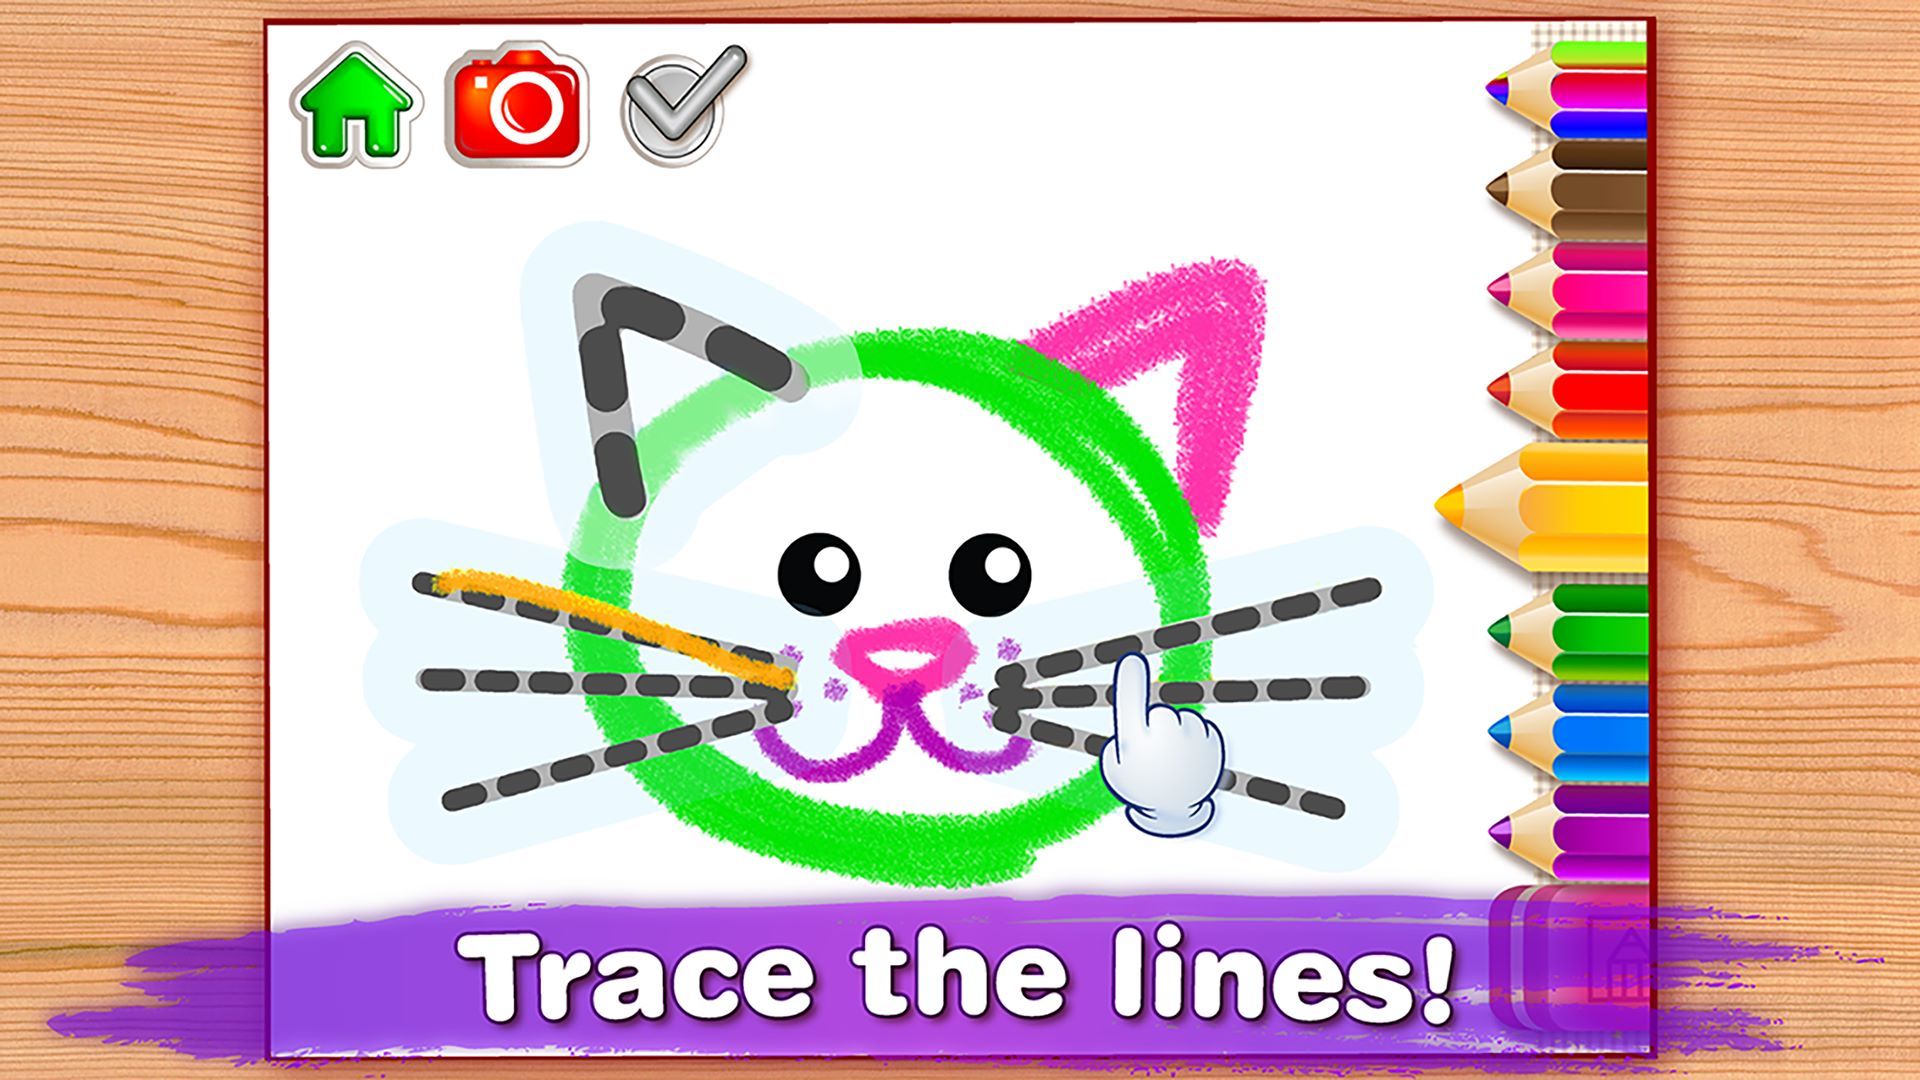 DRAWING FOR KIDS: ALL DRAWINGS COME TO LIFE! Babies Learn to Draw Animals in Coloring Book & Baby Painting Games for Kindergarten! Children Animal Learning Toddlers Apps! Toddler Educational Paint Game 4 Preschoolers FREE 2, 3, 5 Year Olds Girls Boys